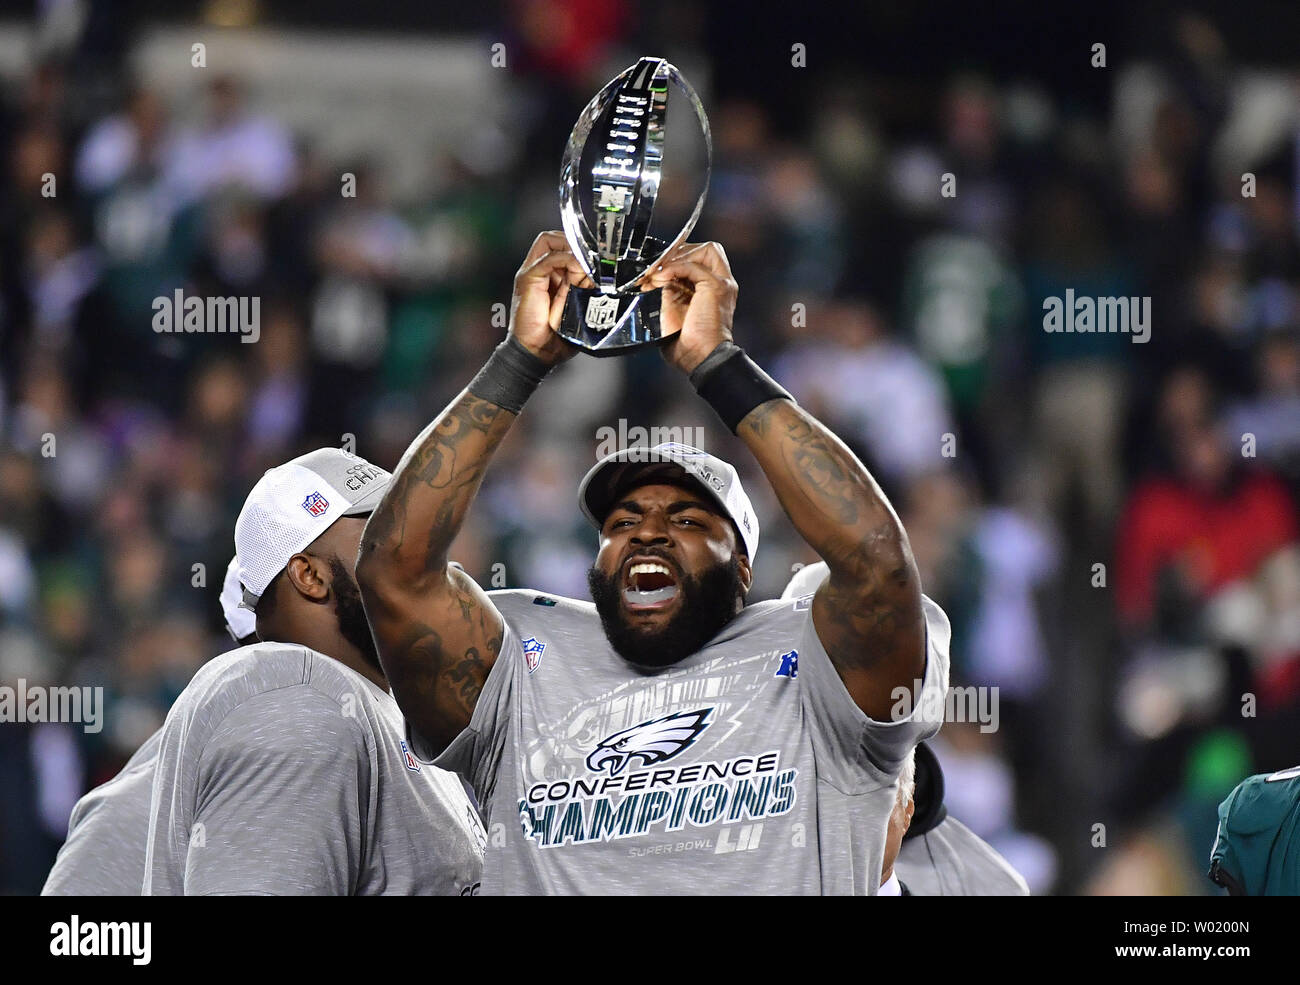 Philadelphia Eagles defensive end Vinny Curry (75) celebrates with the  George Halas NFC Championship Trophy after the Eagles defeated the  Minnesota Vikings 38-7 to win the NFC Championship at Lincoln Financial  Field